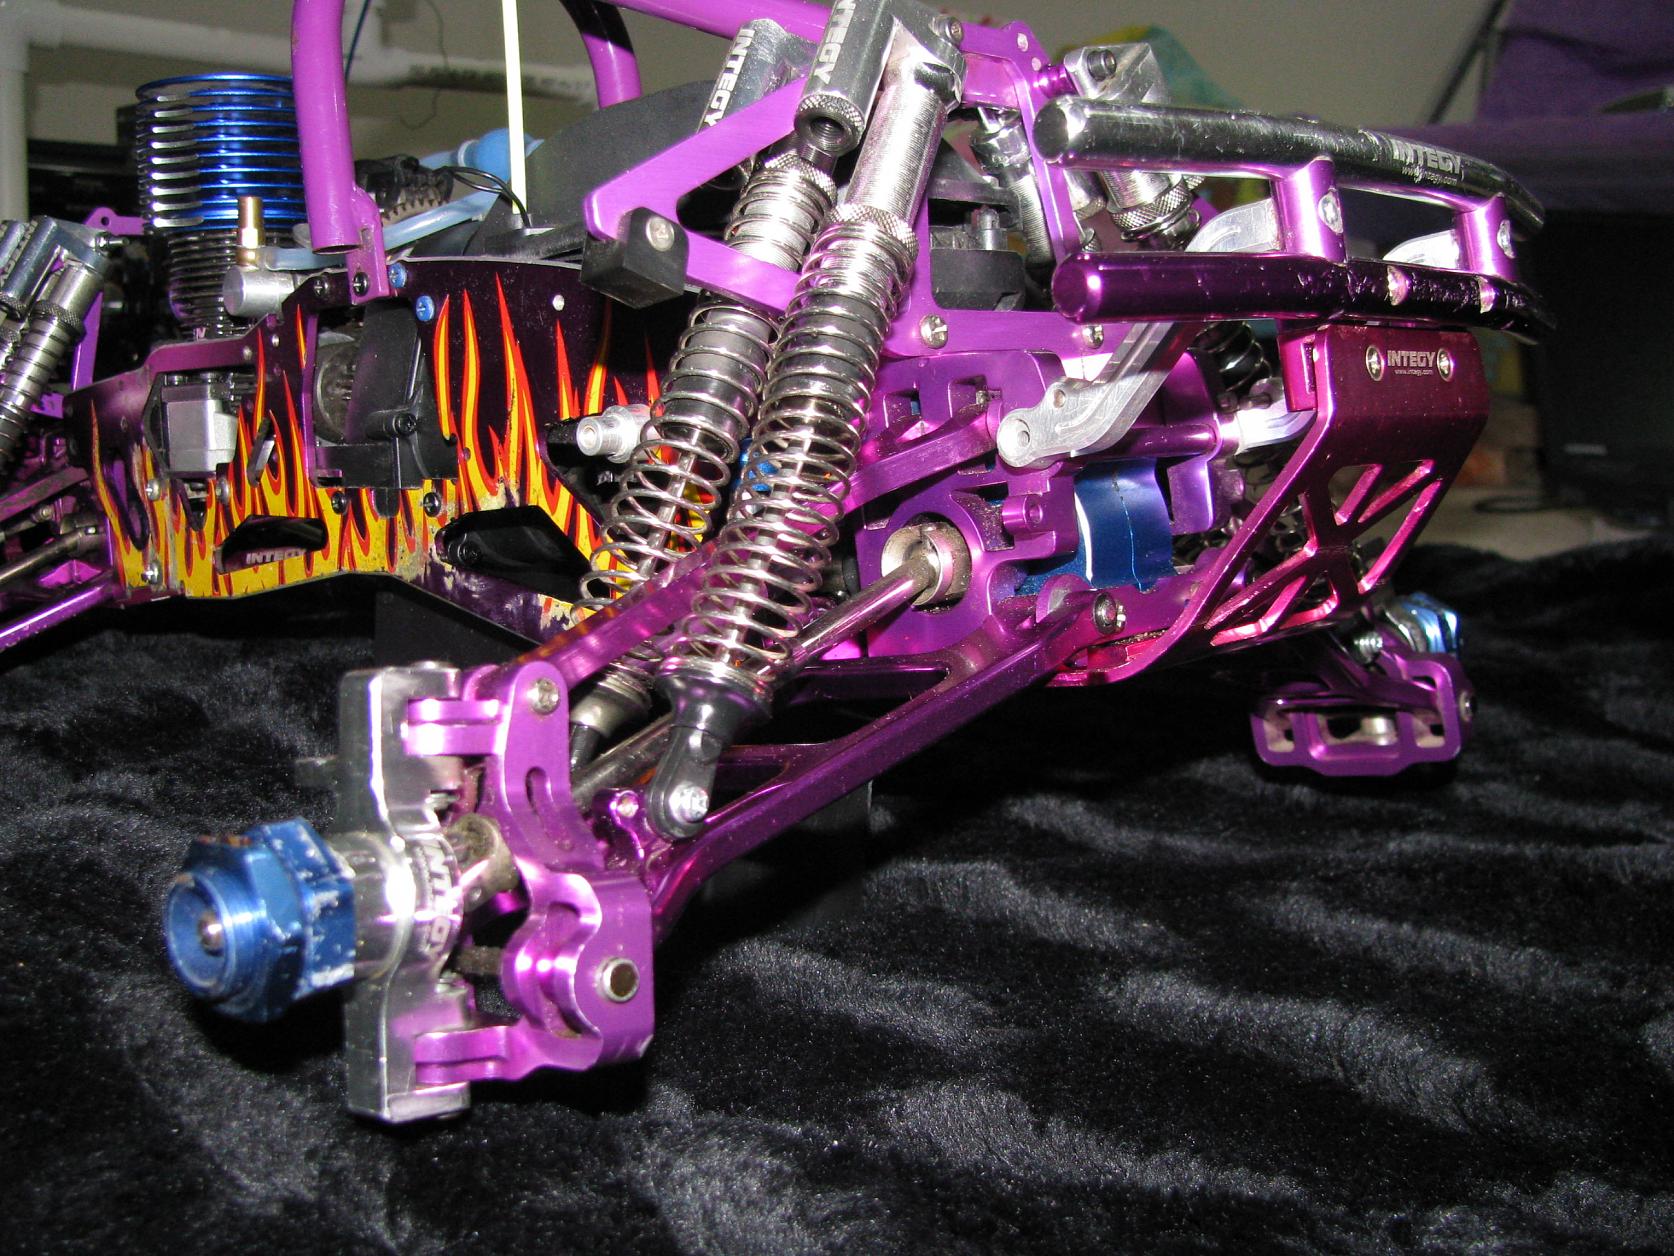 Savage build in progress What do u think - R/C Tech Forums